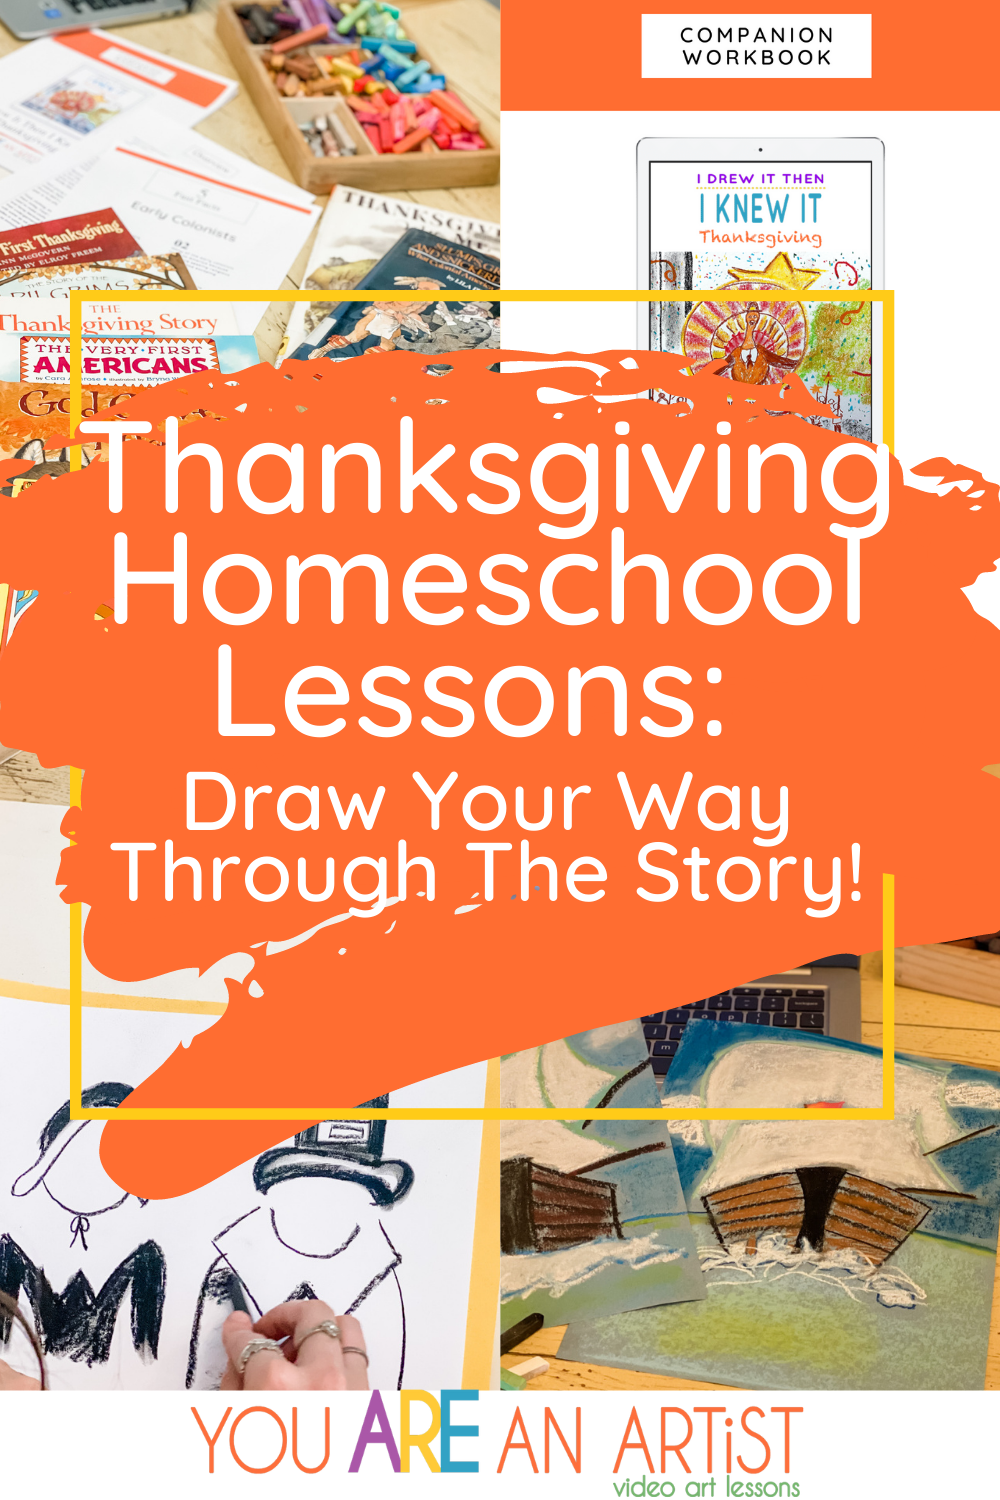 Let us inspire you to include our homeschool lessons as you draw your way through the story of Thanksgiving with chalk pastels! #homeschoolart #thanksgivingactivities #chalkpastels #artcurriculum 